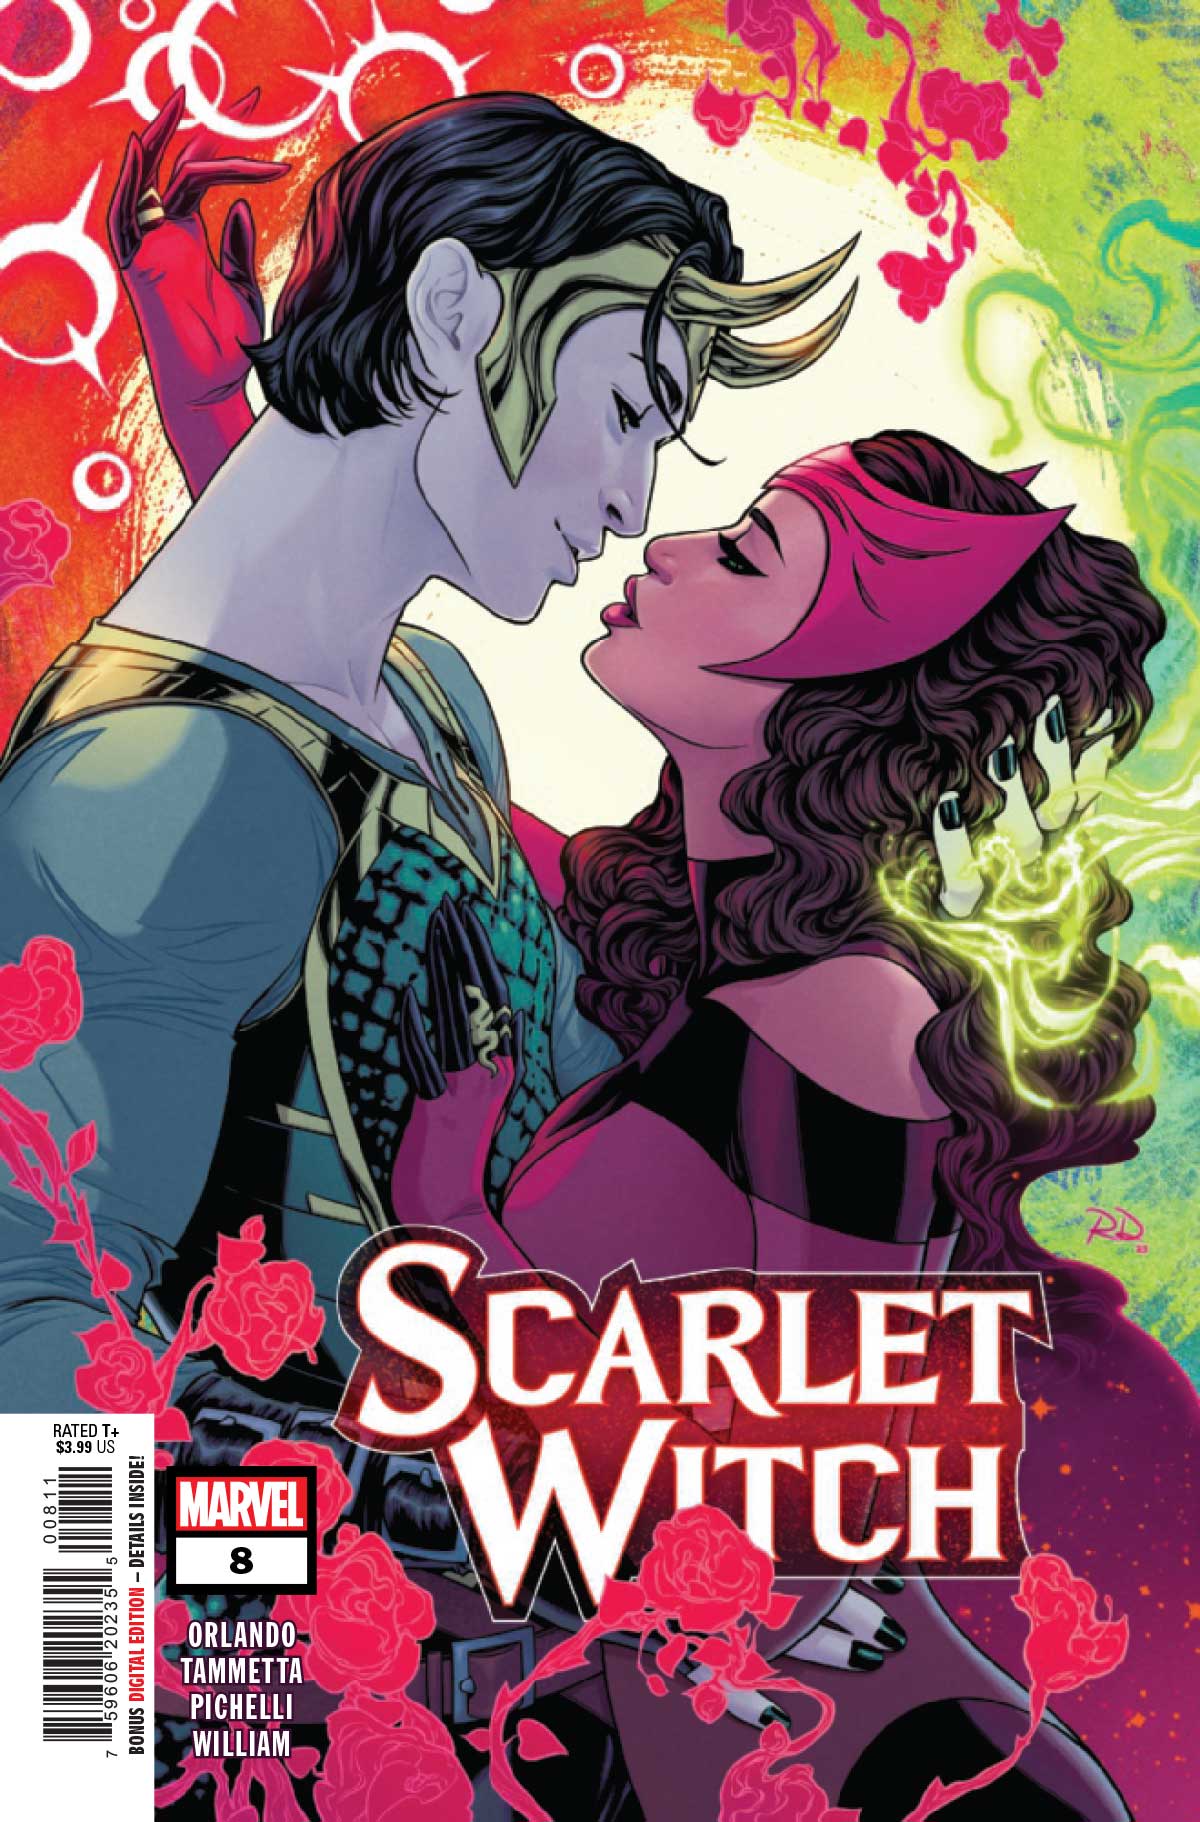 Scarlet Witch #3 review – Too Dangerous For a Girl 2